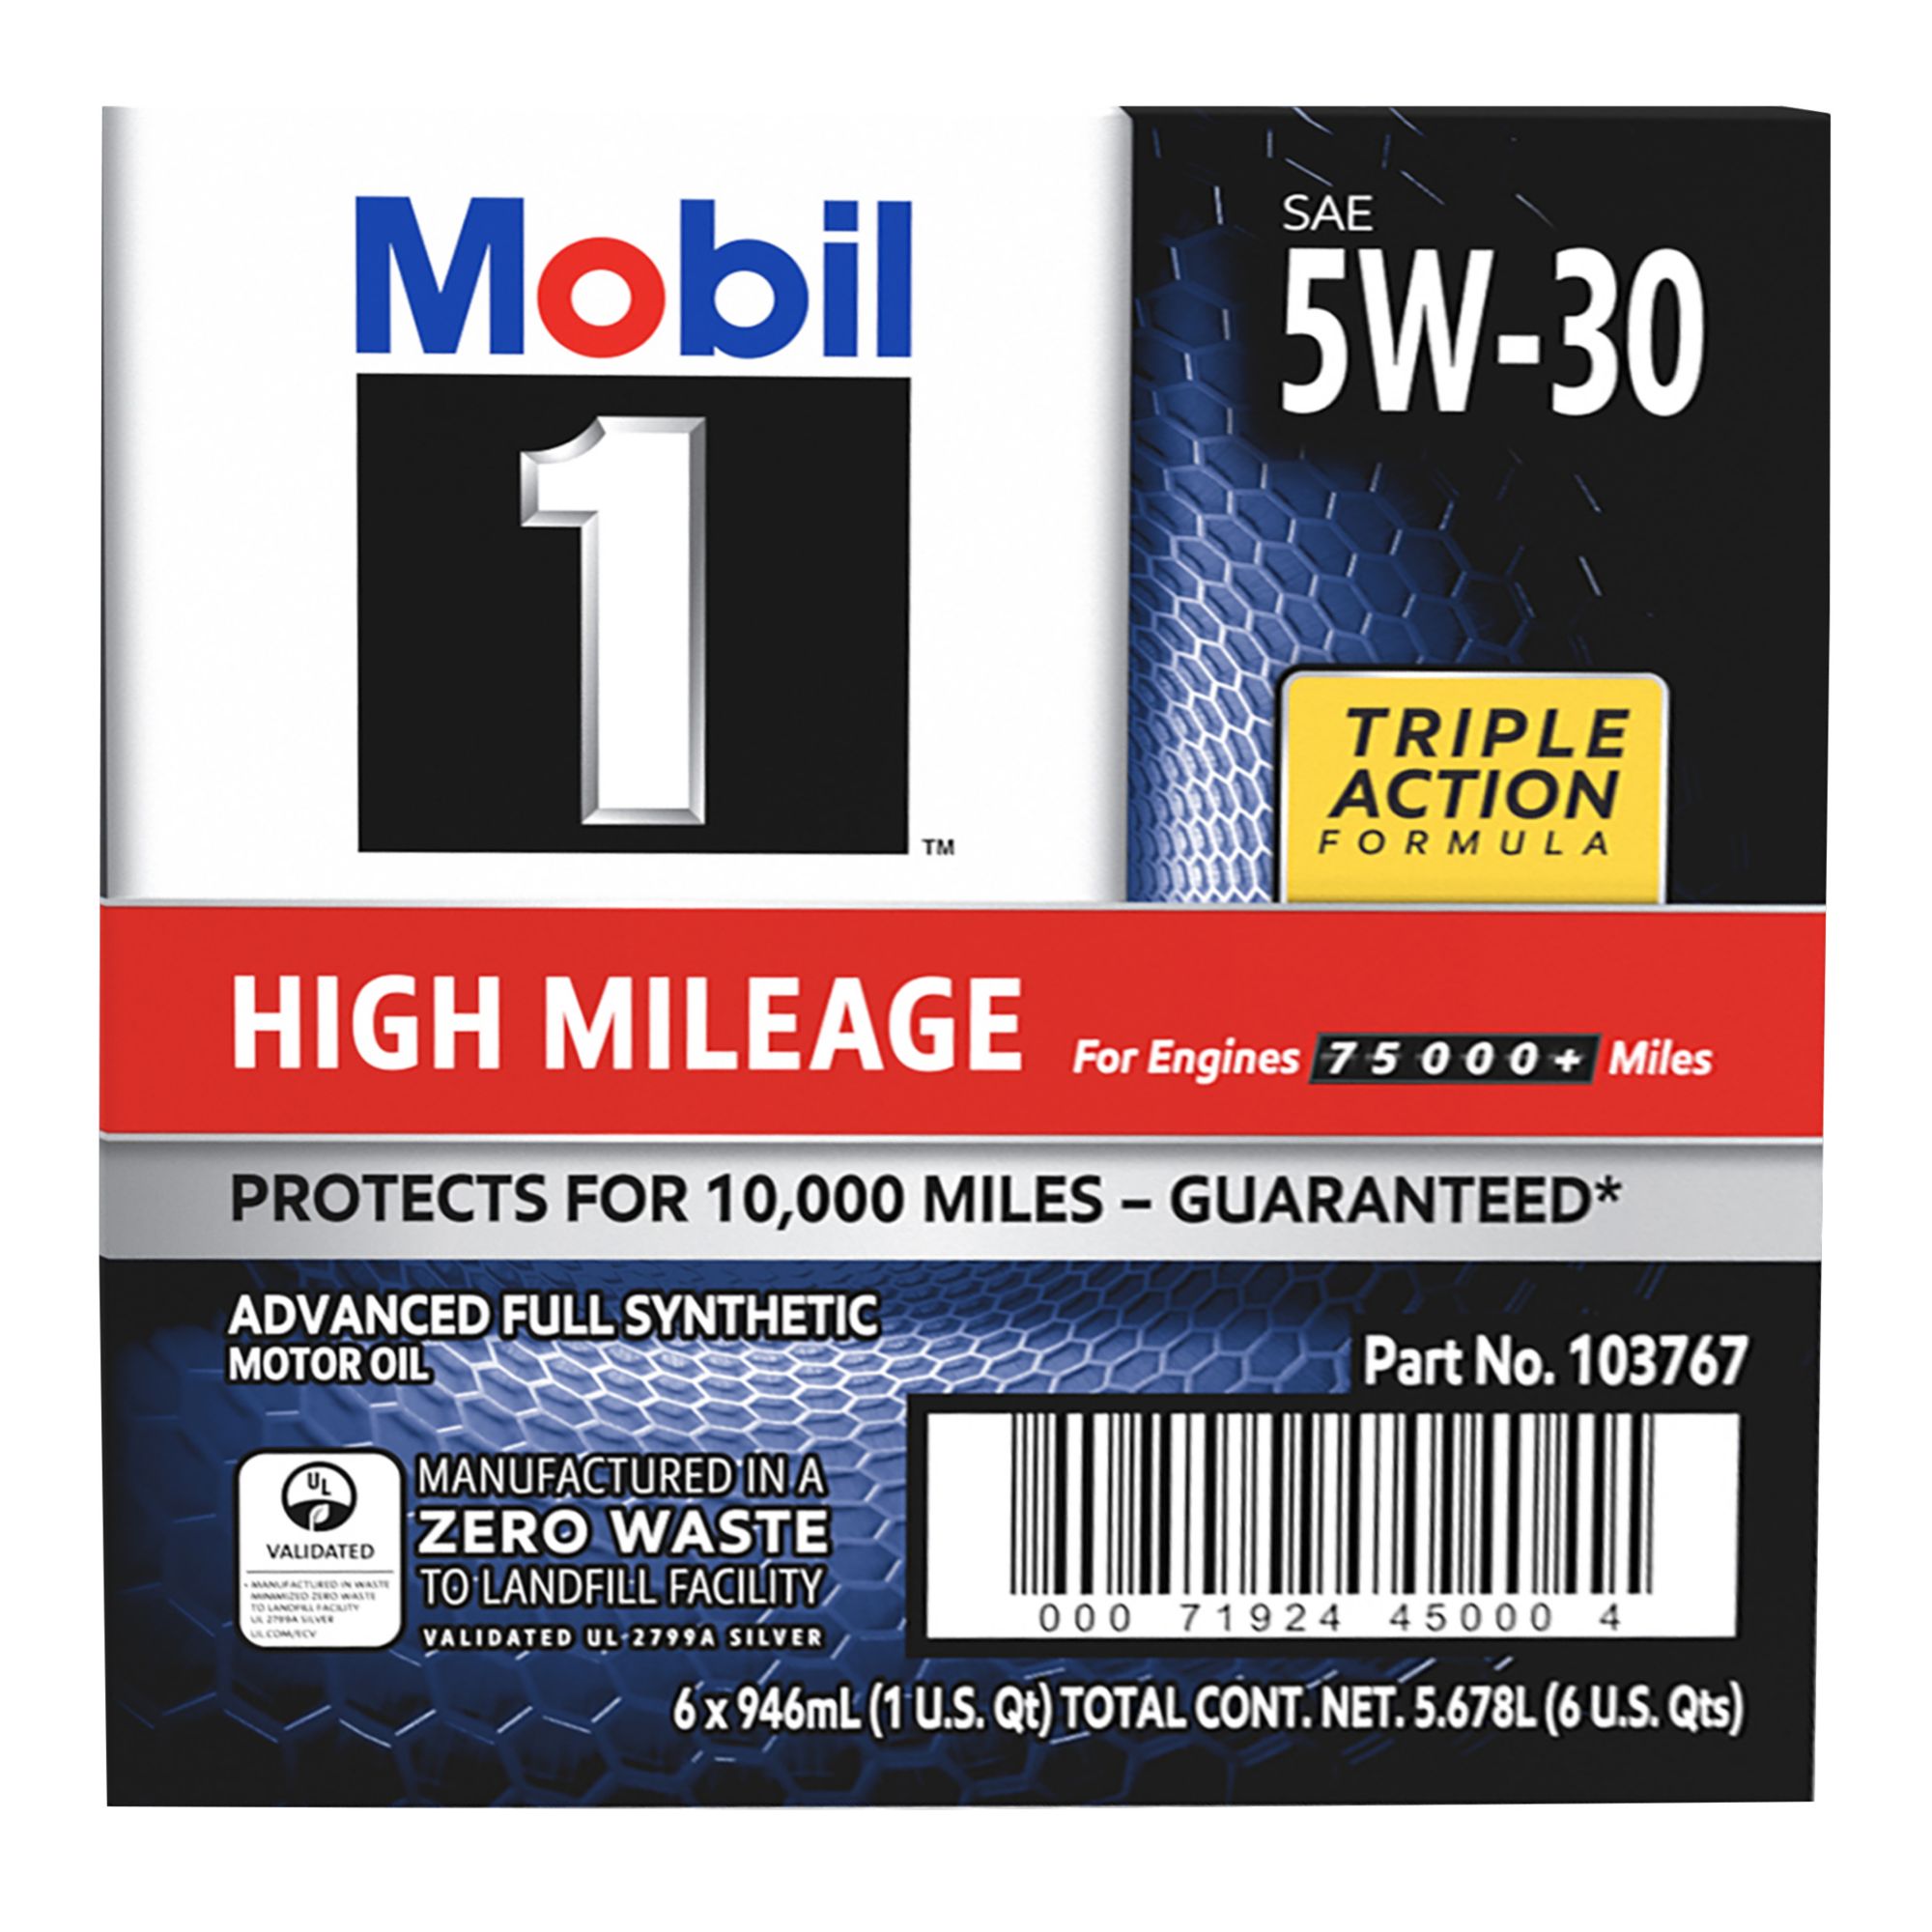 Mobil 1 High Mileage Full Synthetic Motor Oil 5W-30, 1 Quart at